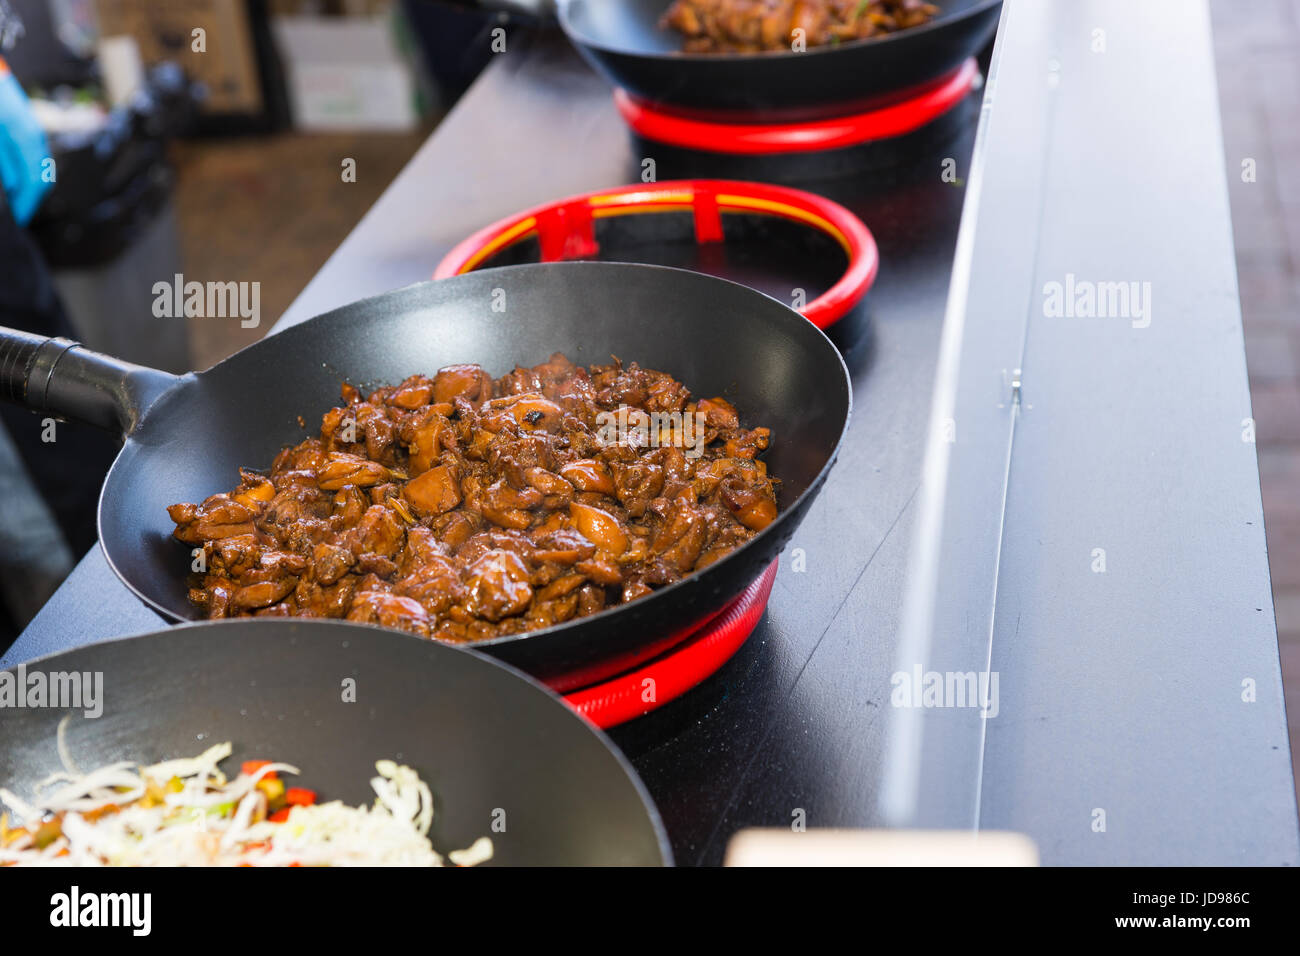 https://c8.alamy.com/comp/JD986C/row-of-woks-with-freshly-cooked-food-on-portable-heating-devices-at-JD986C.jpg